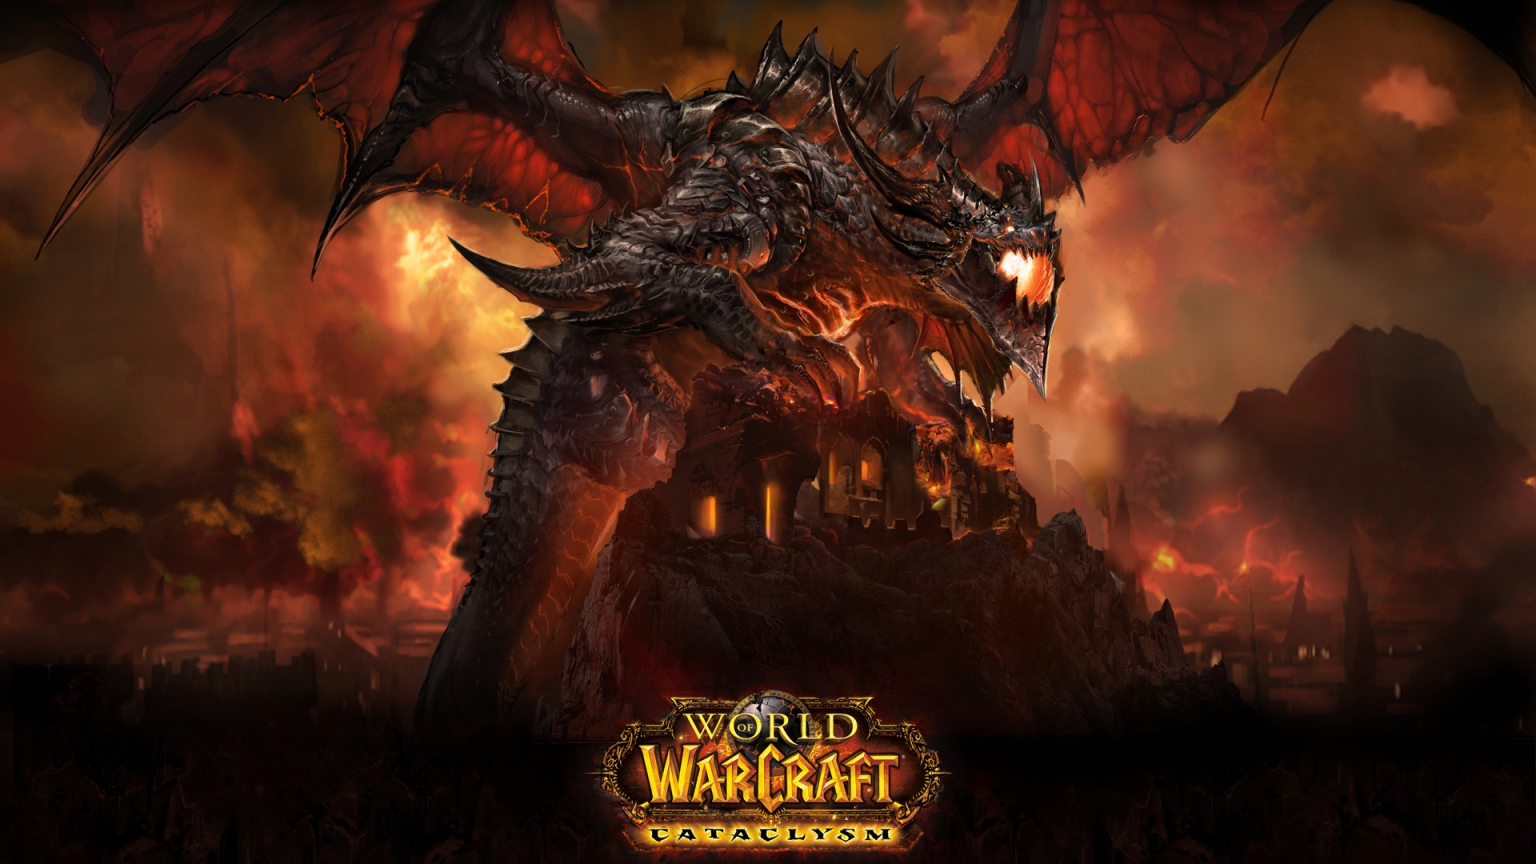 Deathwing WoW Cataclysm for 1536 x 864 HDTV resolution